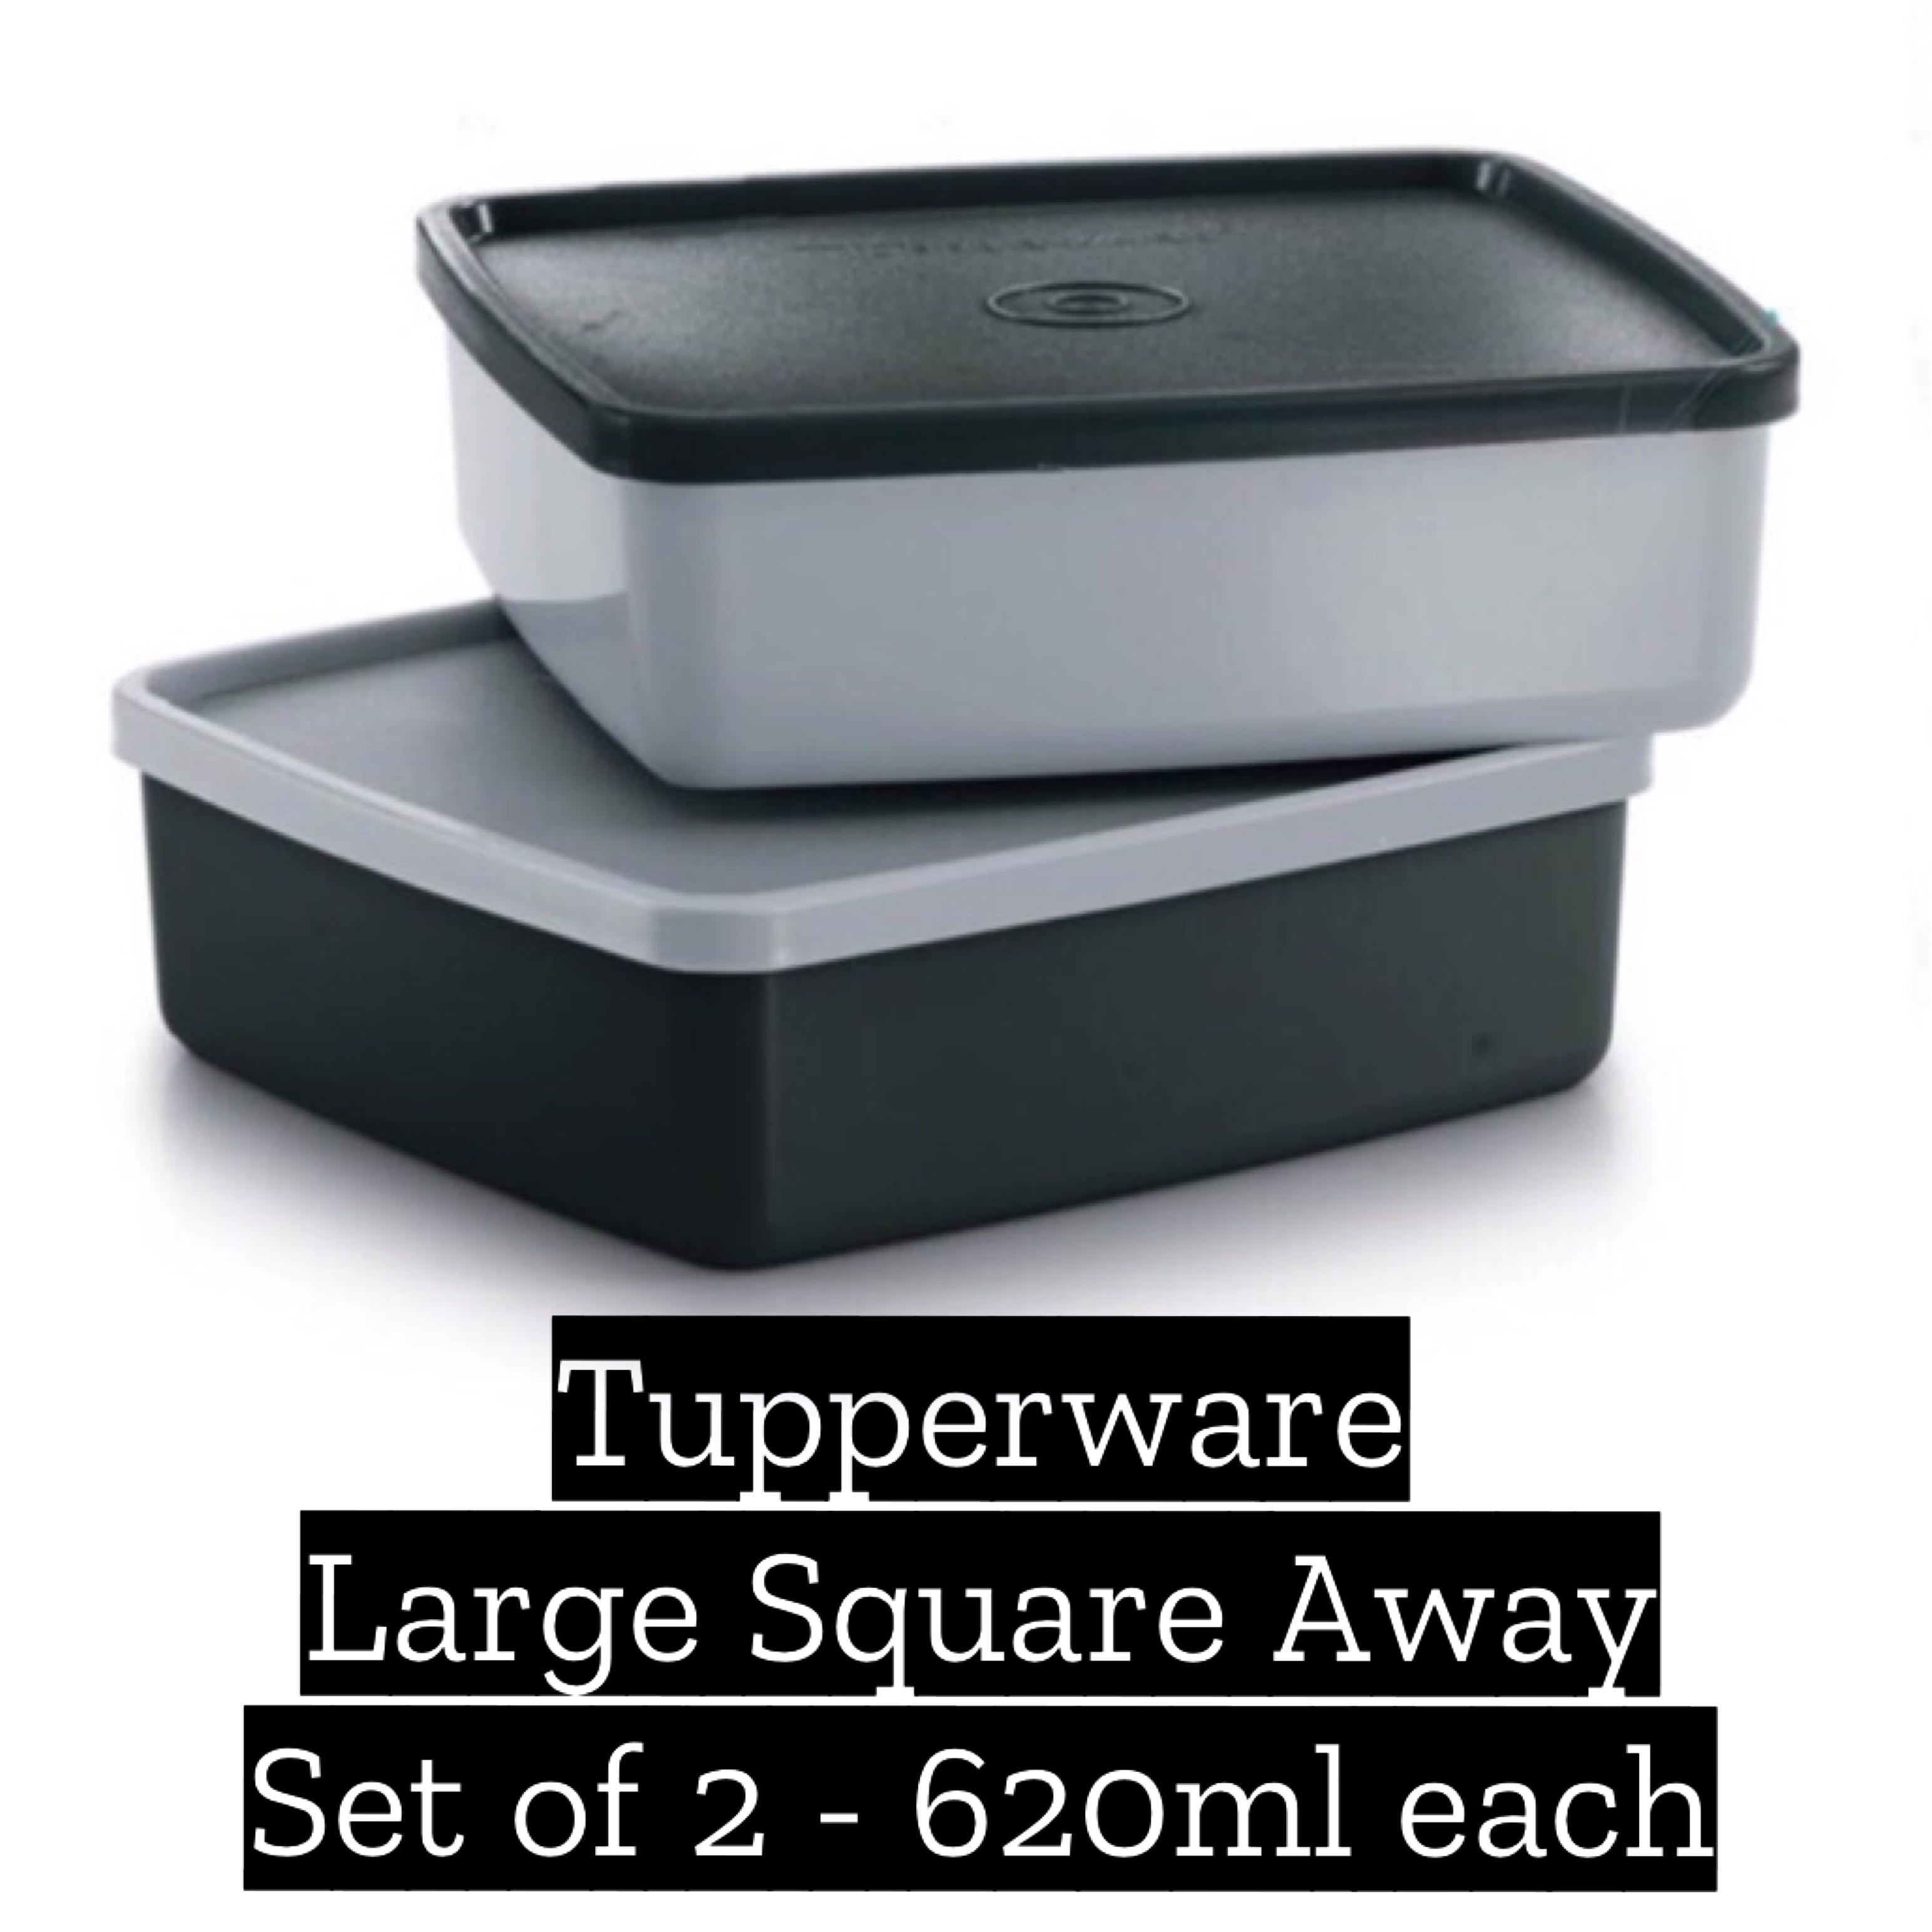 https://media.karousell.com/media/photos/products/2021/7/15/tupperware_large_square_away_s_1626373106_592c16dc.jpg